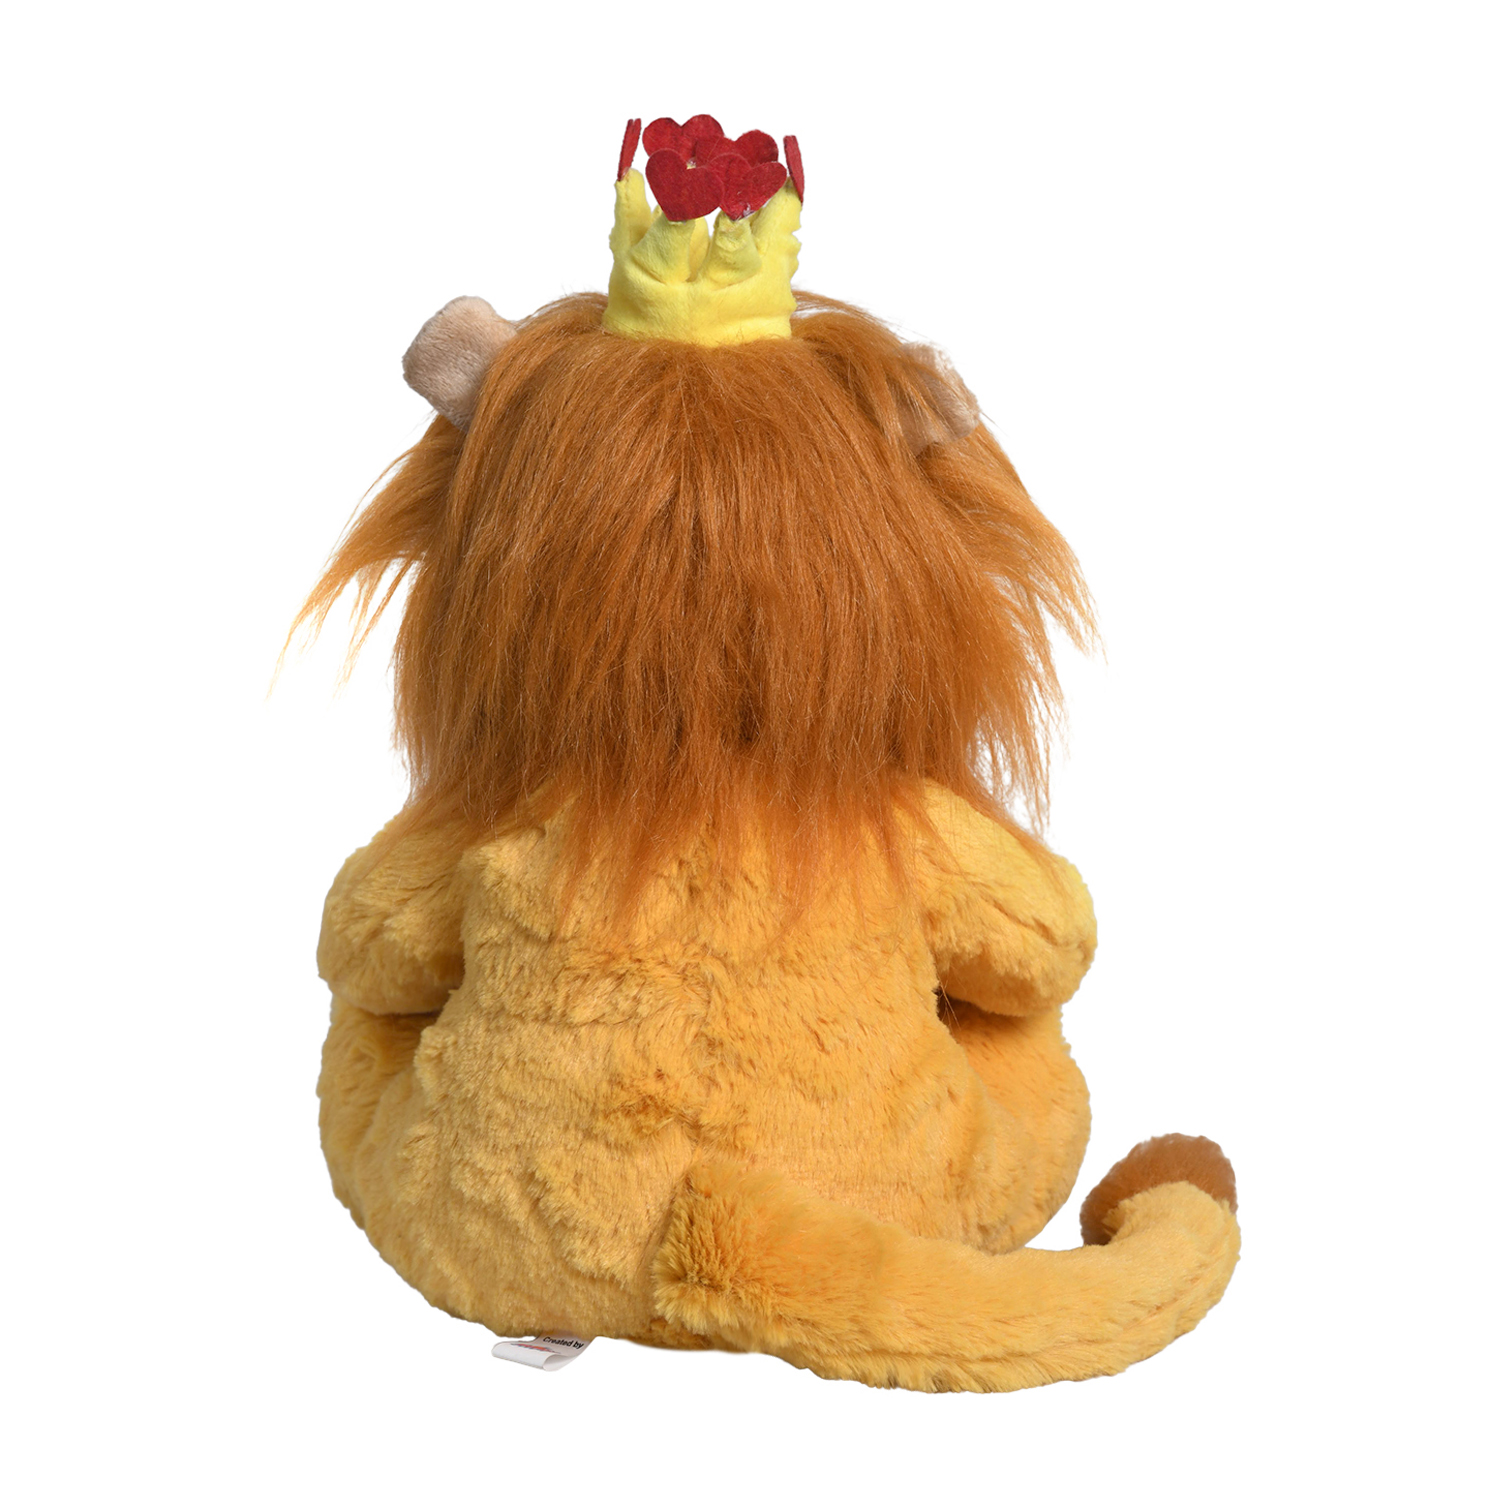 Ultra Wild Lion Stuffed Soft Plush Kids Animal Toy Holding Red Heart 13 Inch Brown